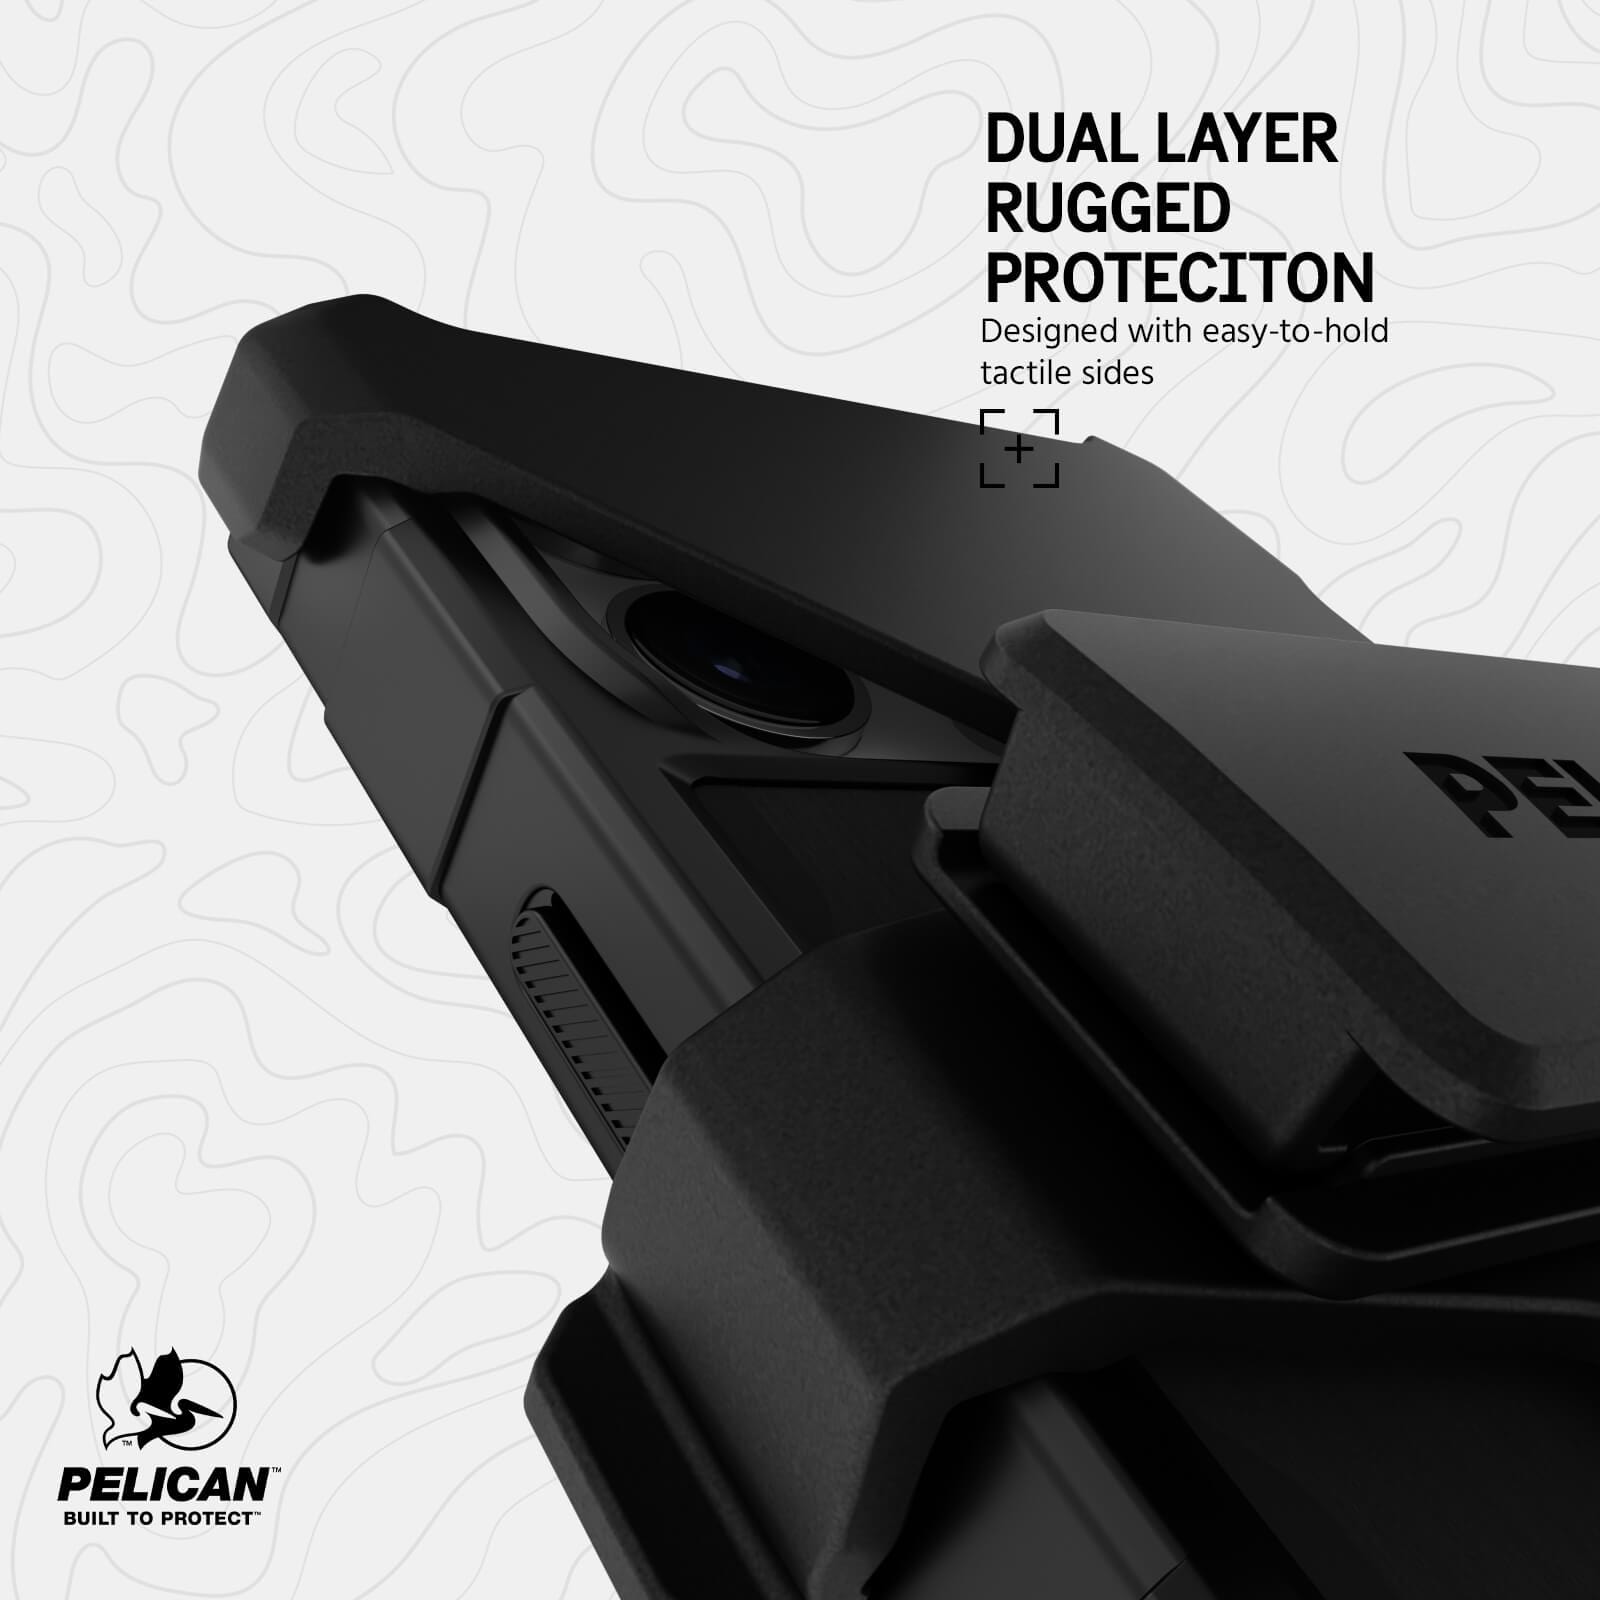 DUAL LAYER RUGGED PROTECTION. DESIGNED WITH EASY-TO-HOLD TACTILE SIDES.